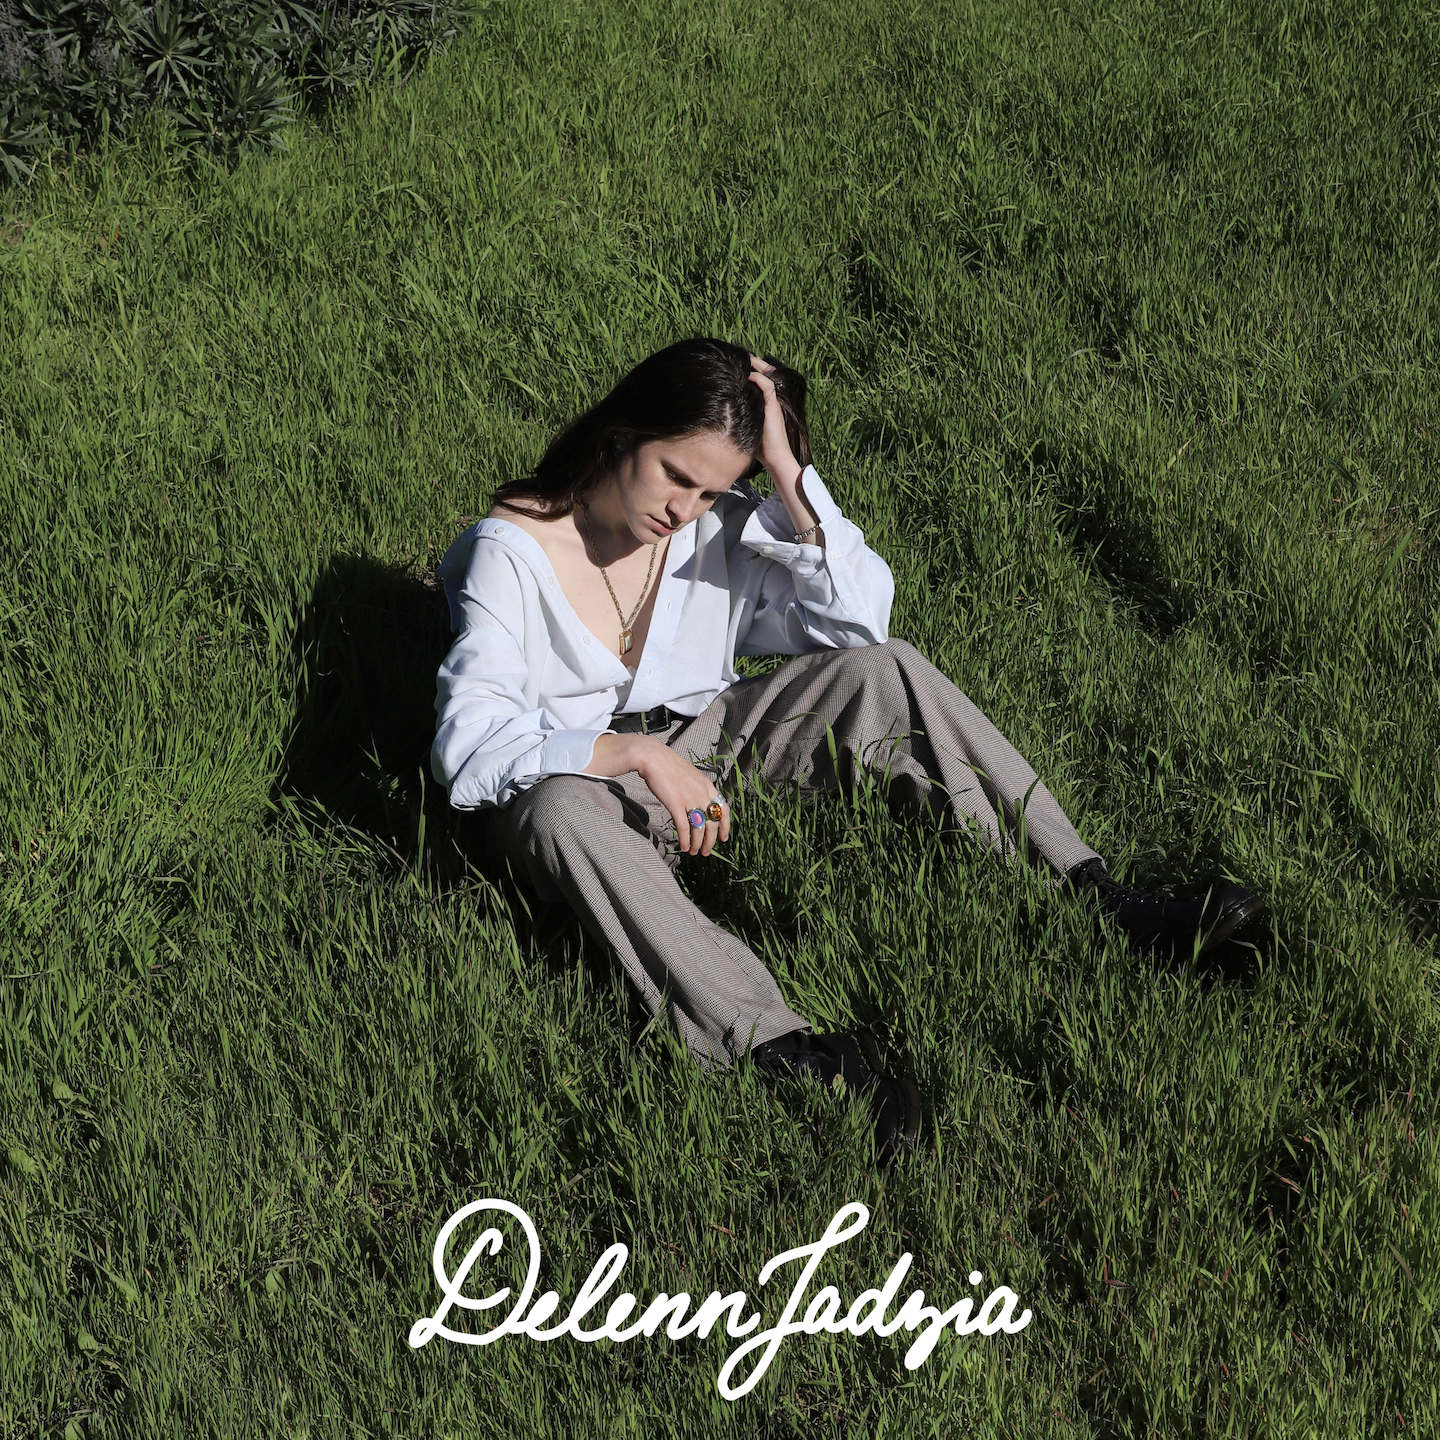 A person in androgynous clothing sits in a grassy field